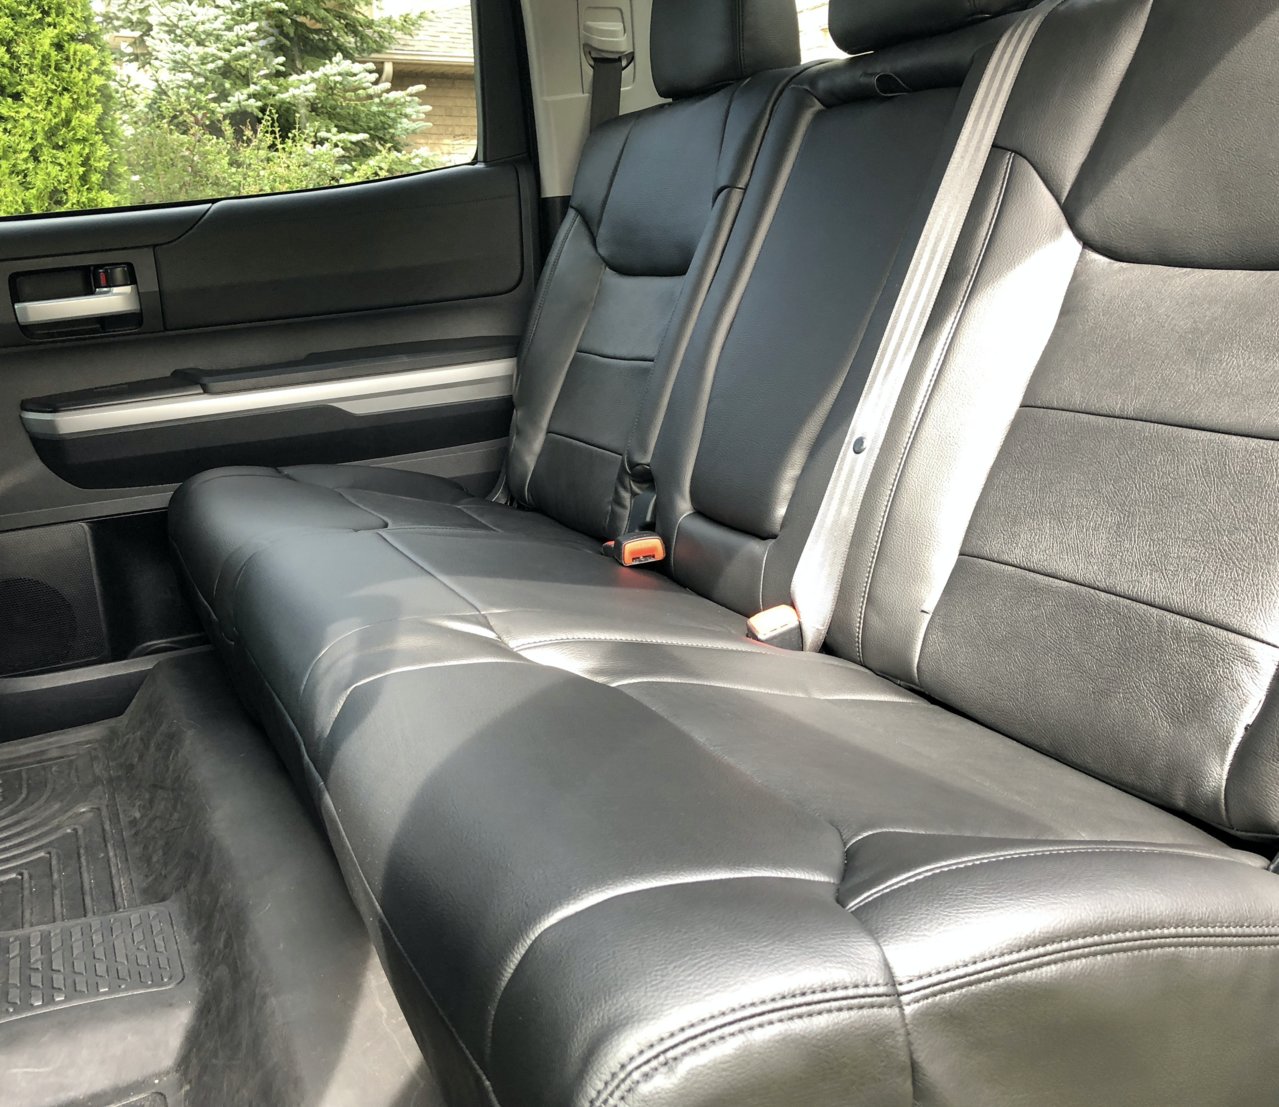 "LEATHER" SEAT COVERS | Toyota Tundra Forum